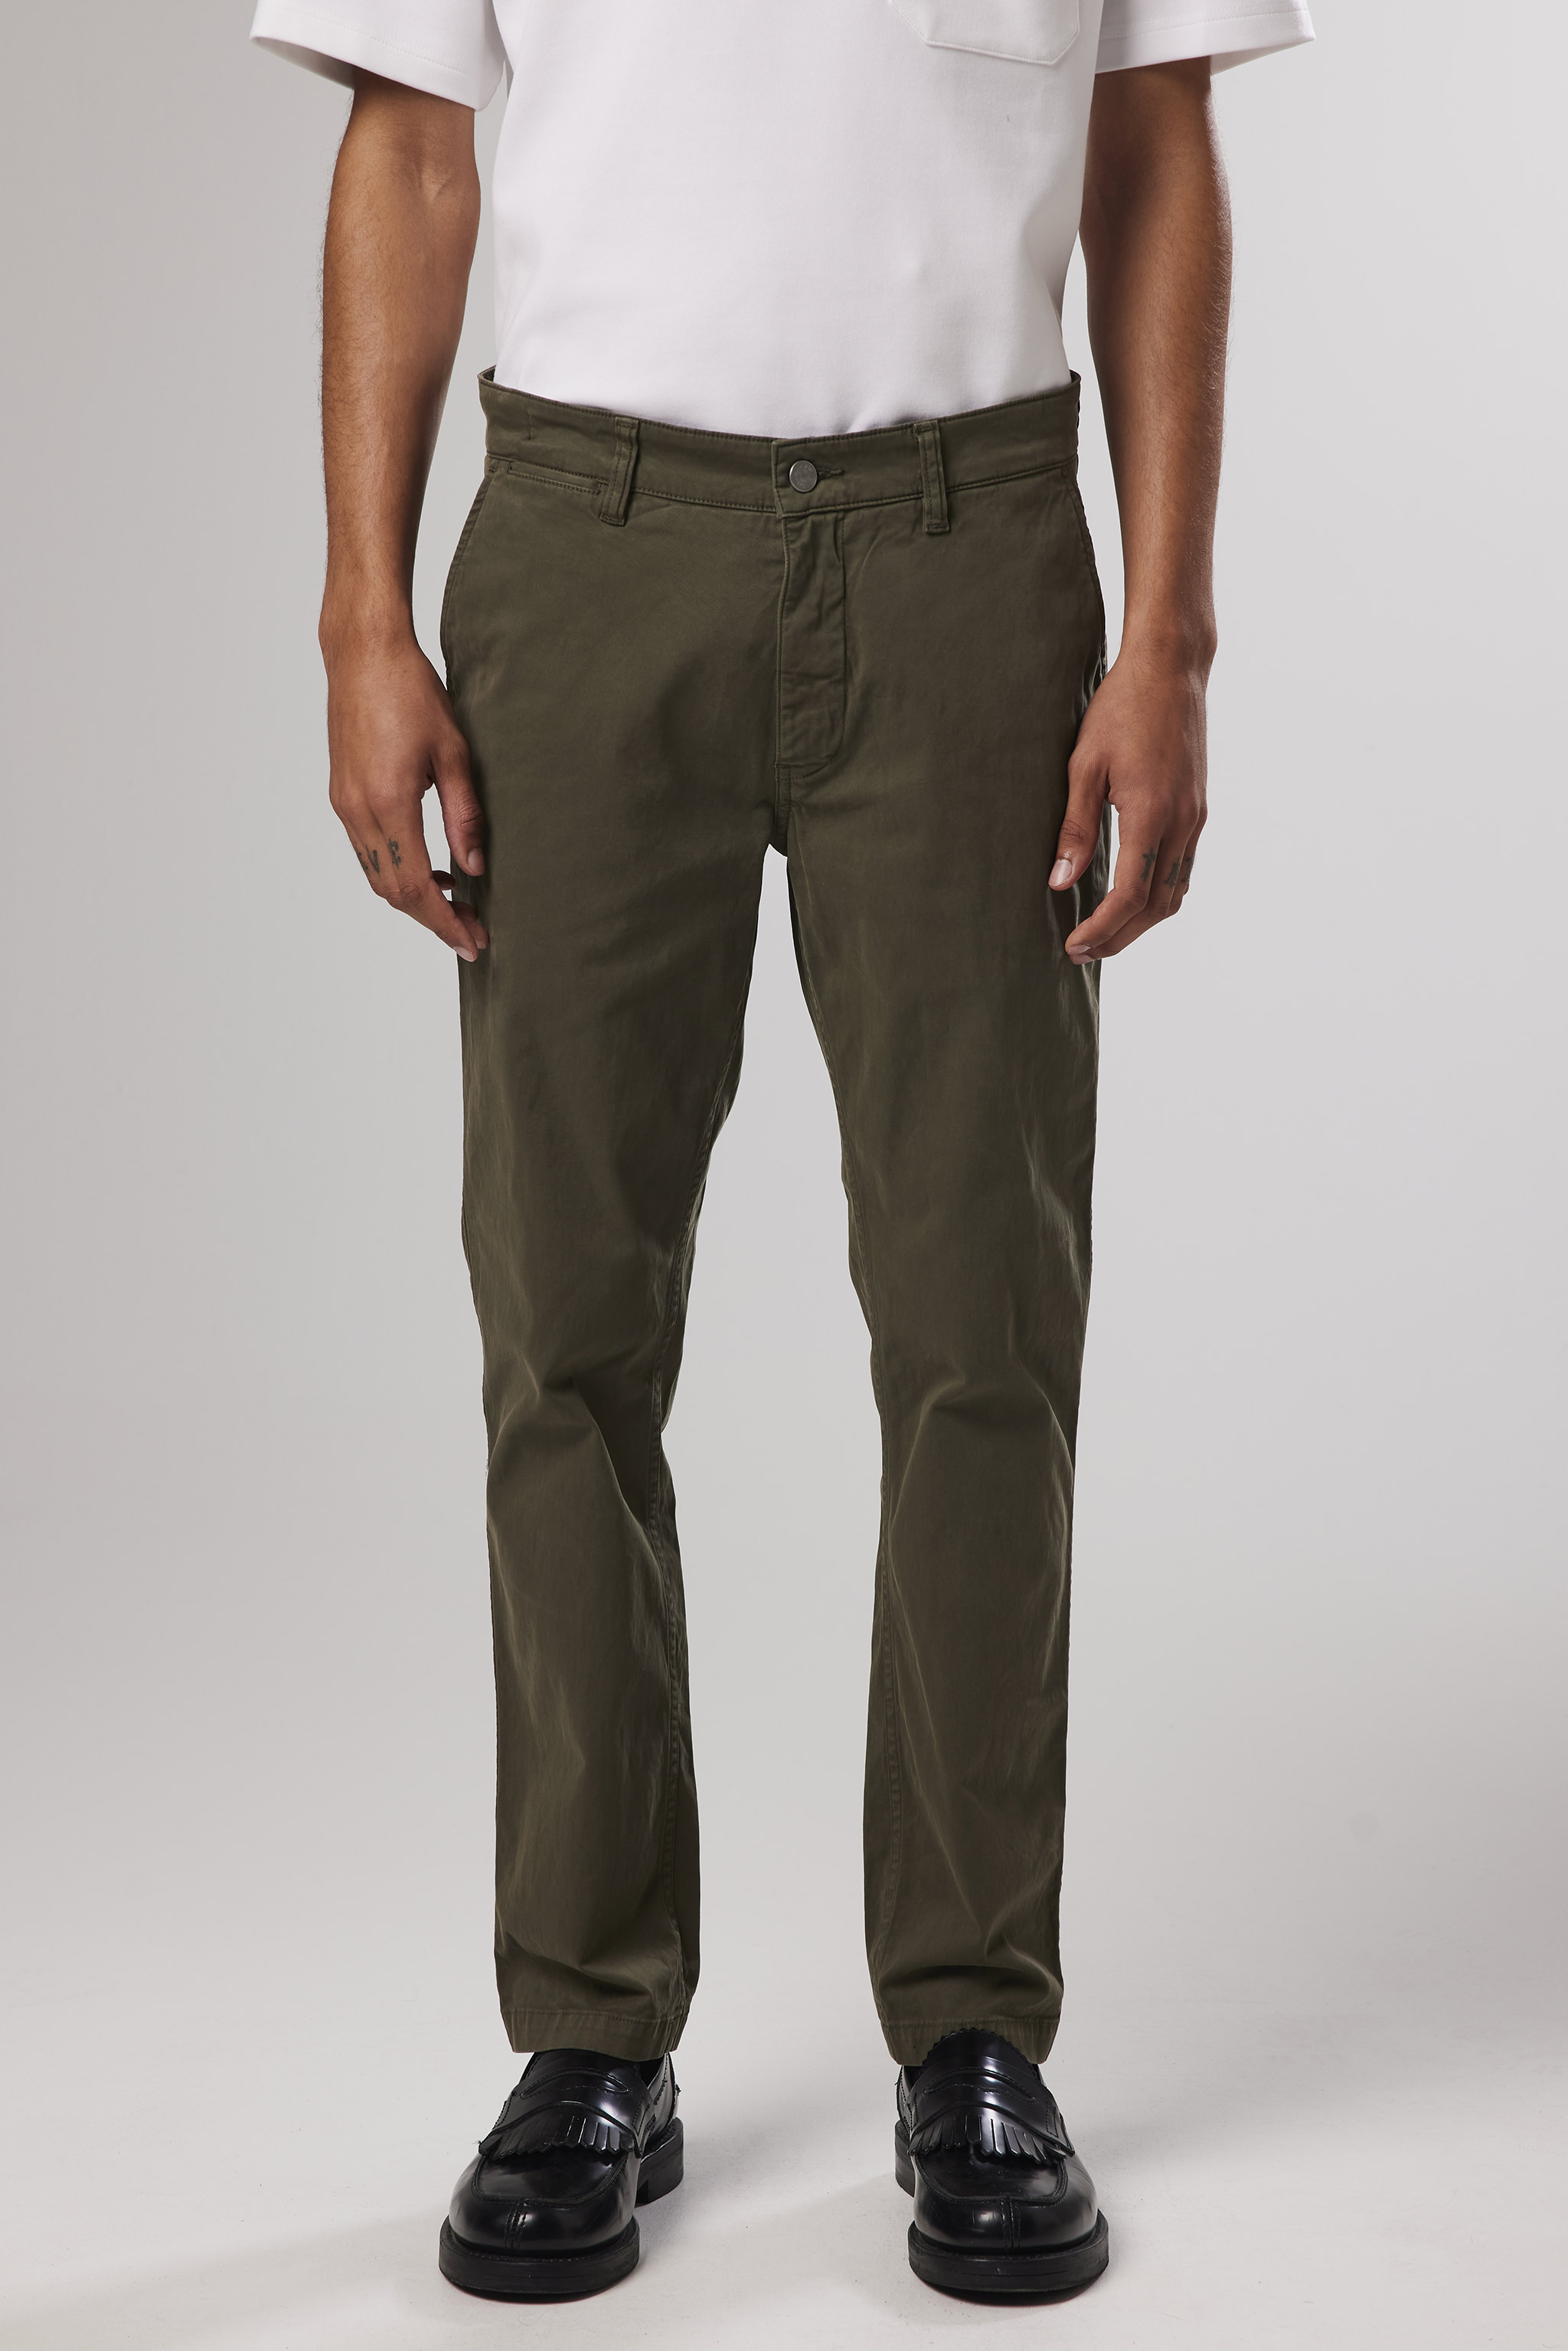 Marco 1400 men's chinos - Green - Buy online at NN07®